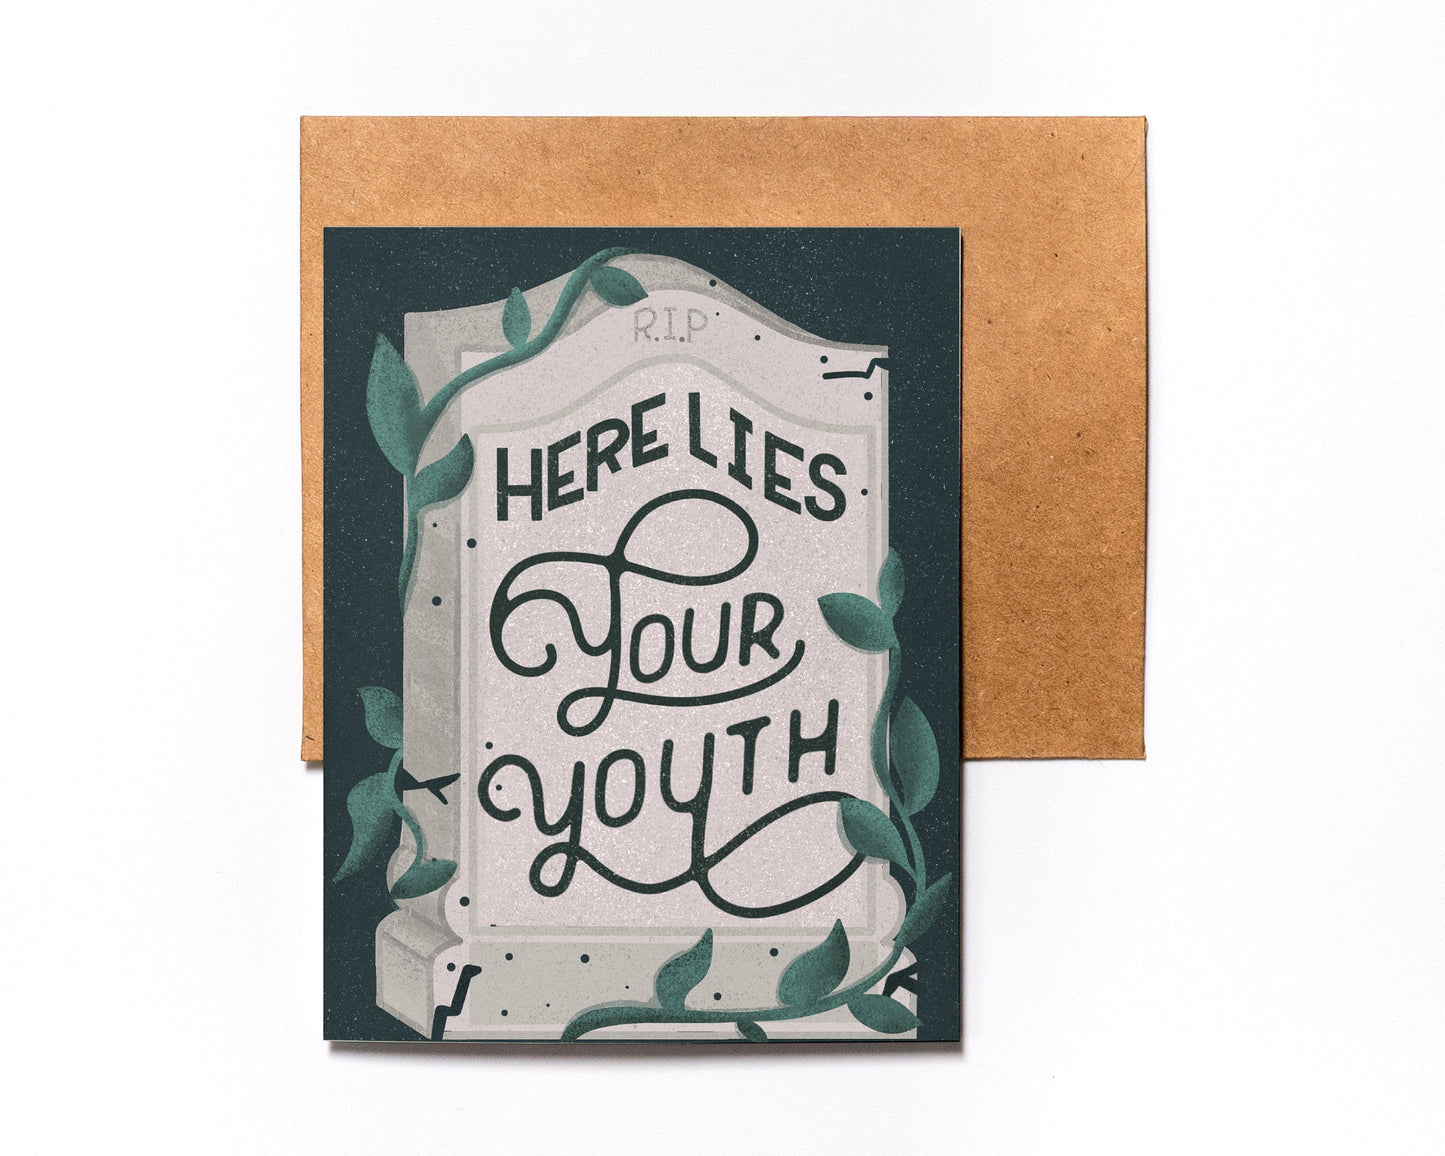 Birthday Card | Here Lies Your Youth - Birthday Gift Ideas - Funny Card - Wishing You A Happy Birthday - For Friend - Big Birthday - Party